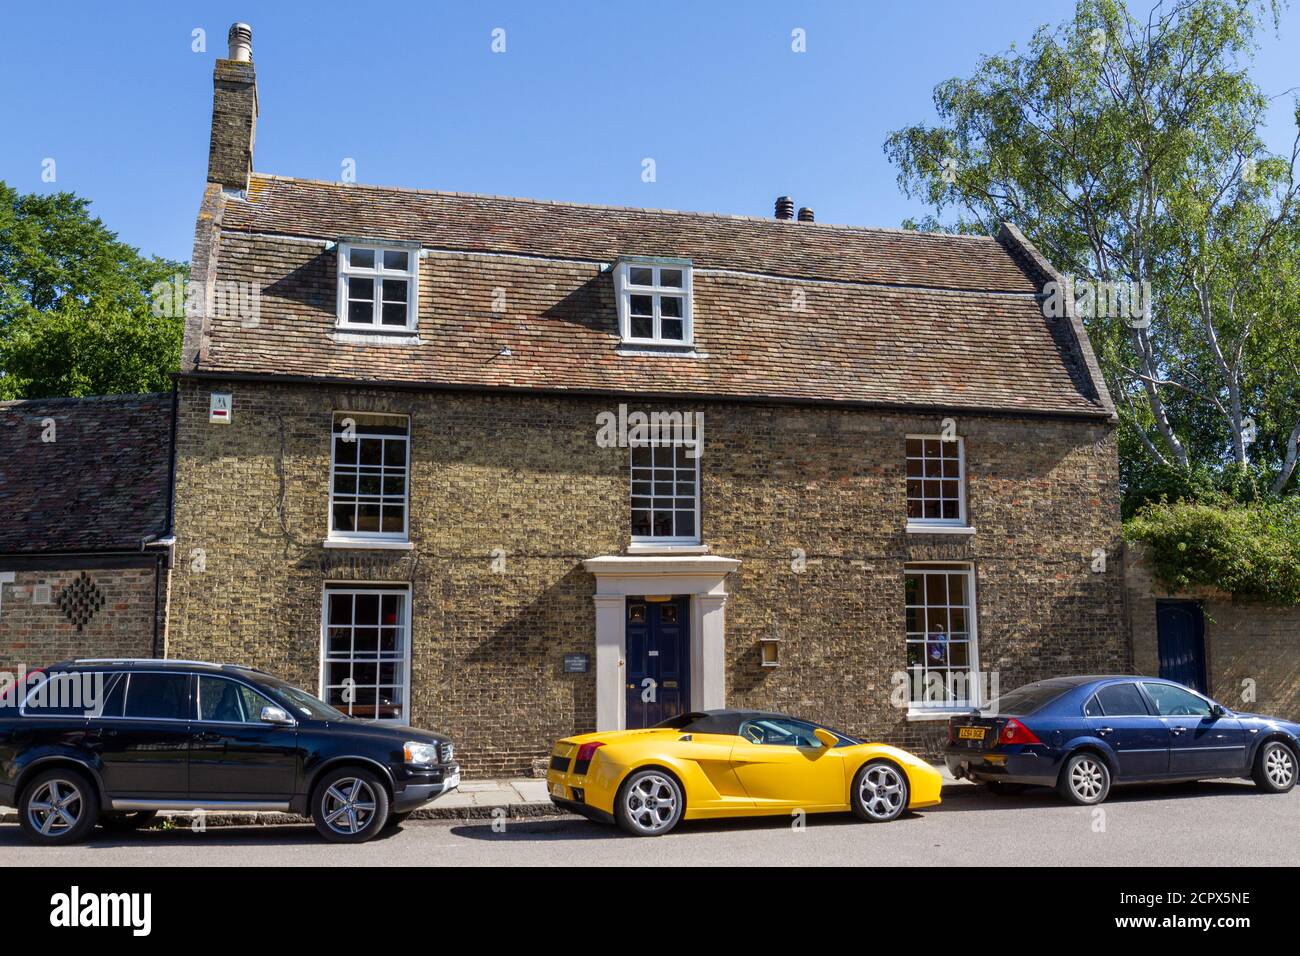 The Old Fire Engine House is a family owned restaurant and art gallery near Ely cathedral, Ely, Cambridgeshire, UK. Stock Photo